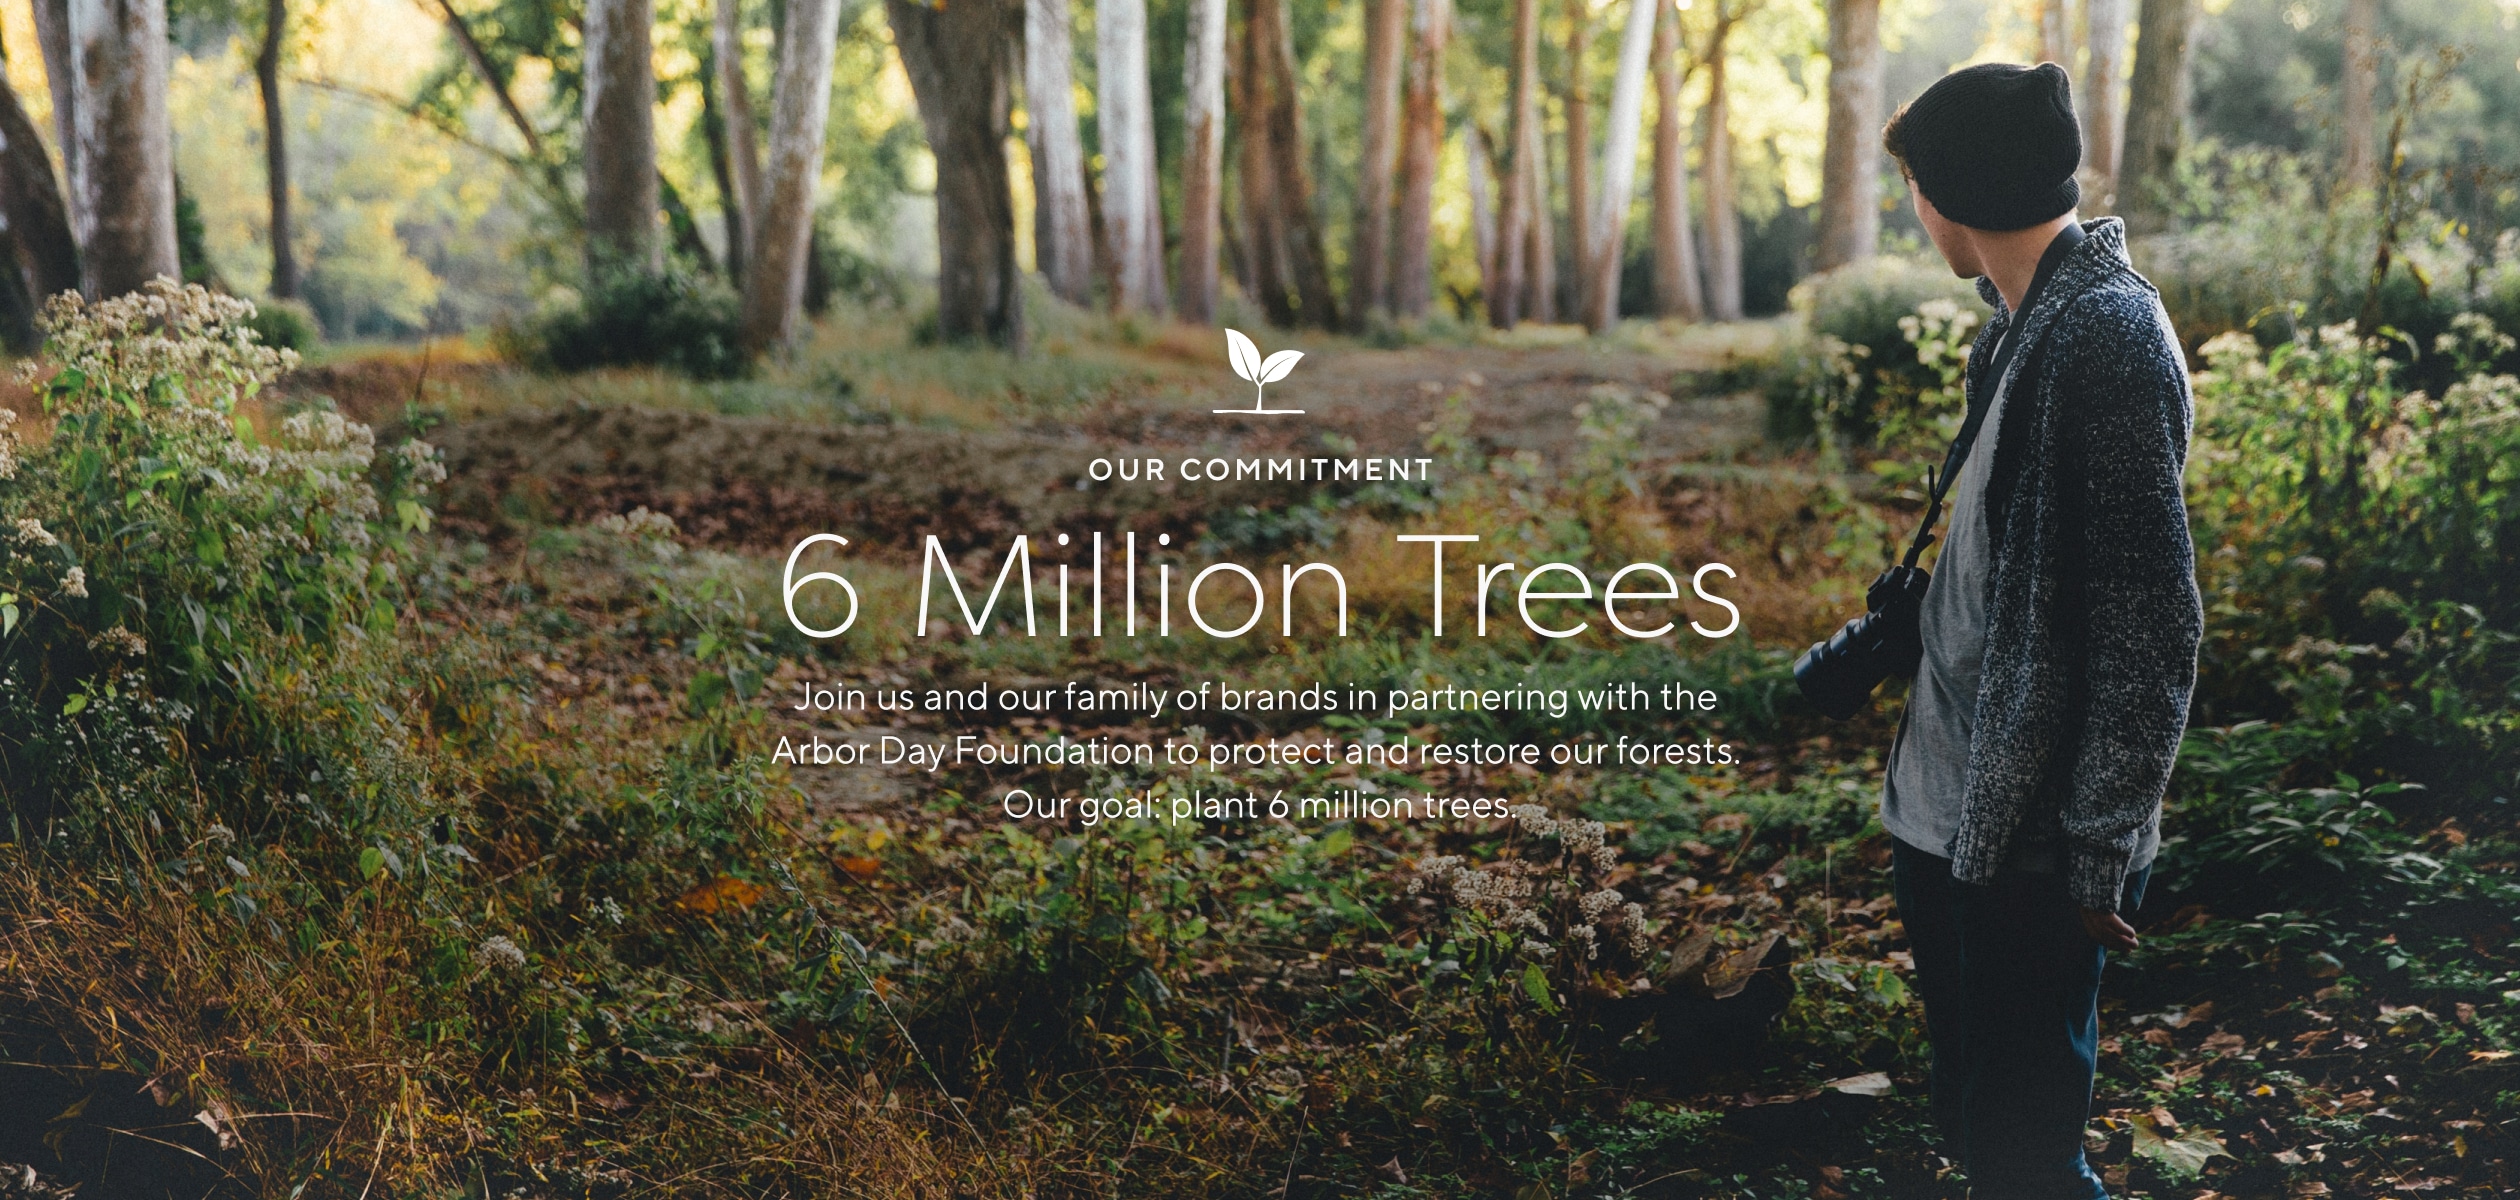 Our commitment: 6 Million Trees. Join us and our family of brands in partnering with the Arbor Day Foundation to protect and restore our forests. Our goal: Plant 6 million trees.